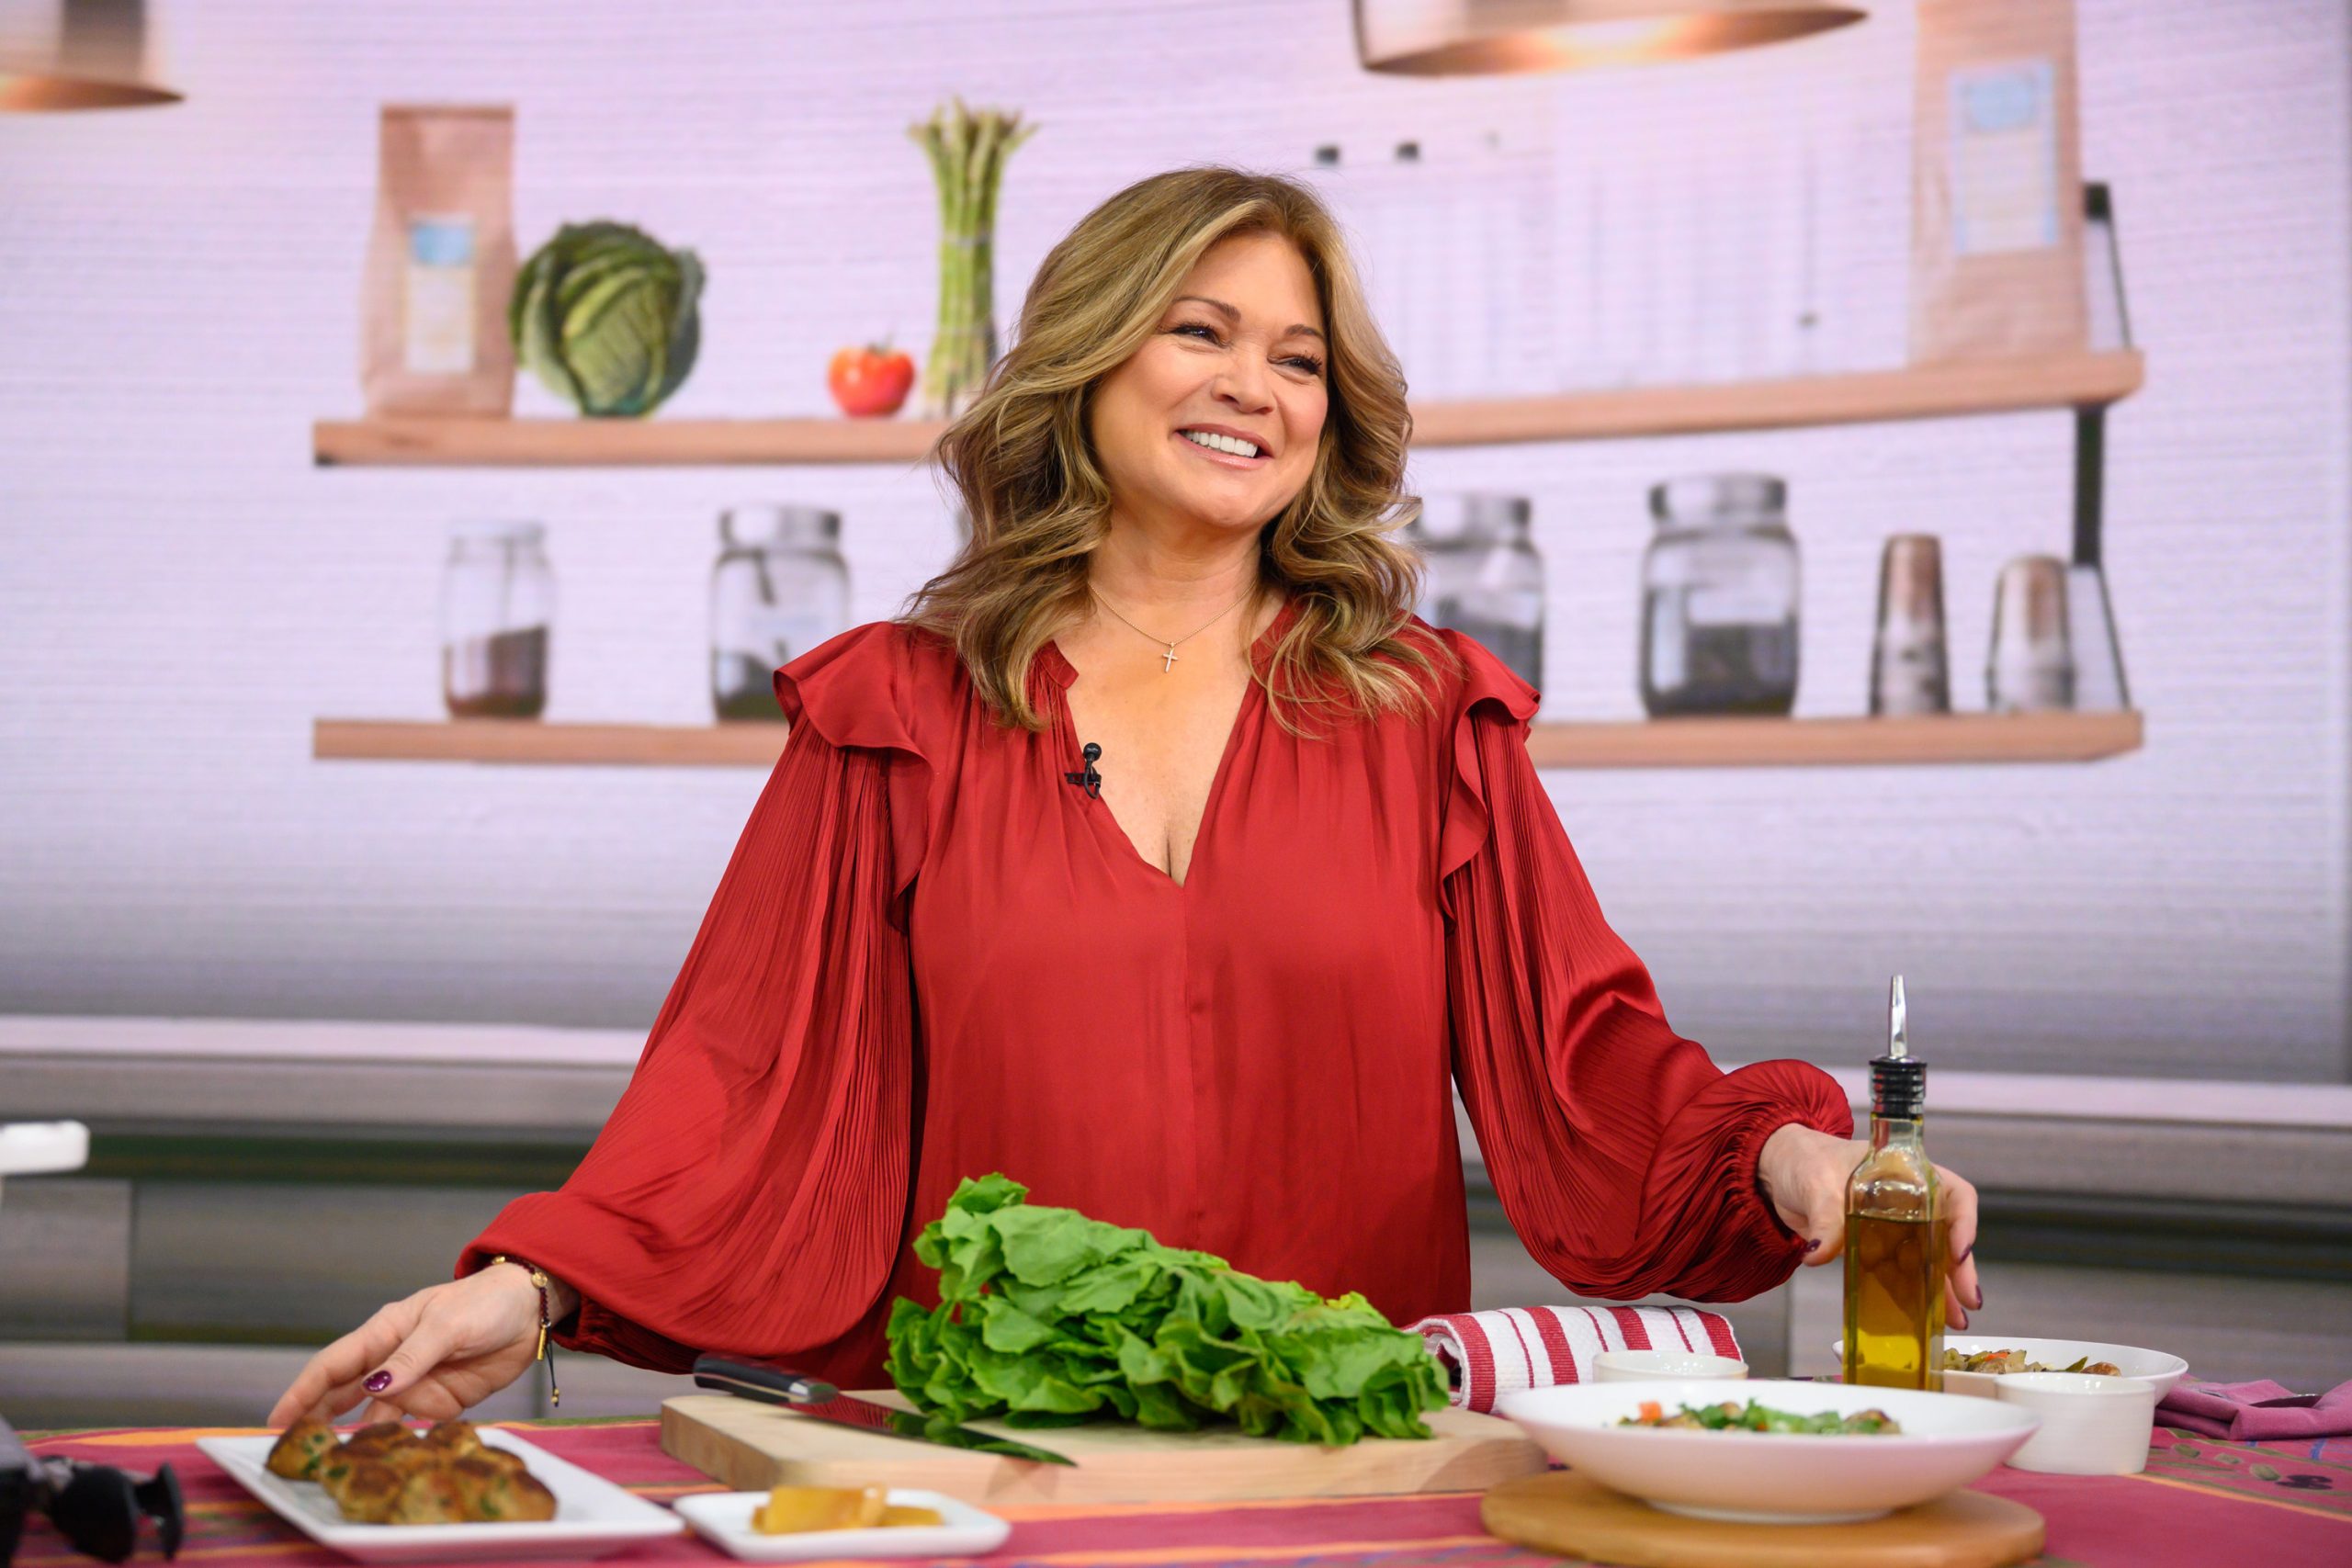 Actor Valerie Bertinelli wears a long-sleeved red blouse in this photograph.